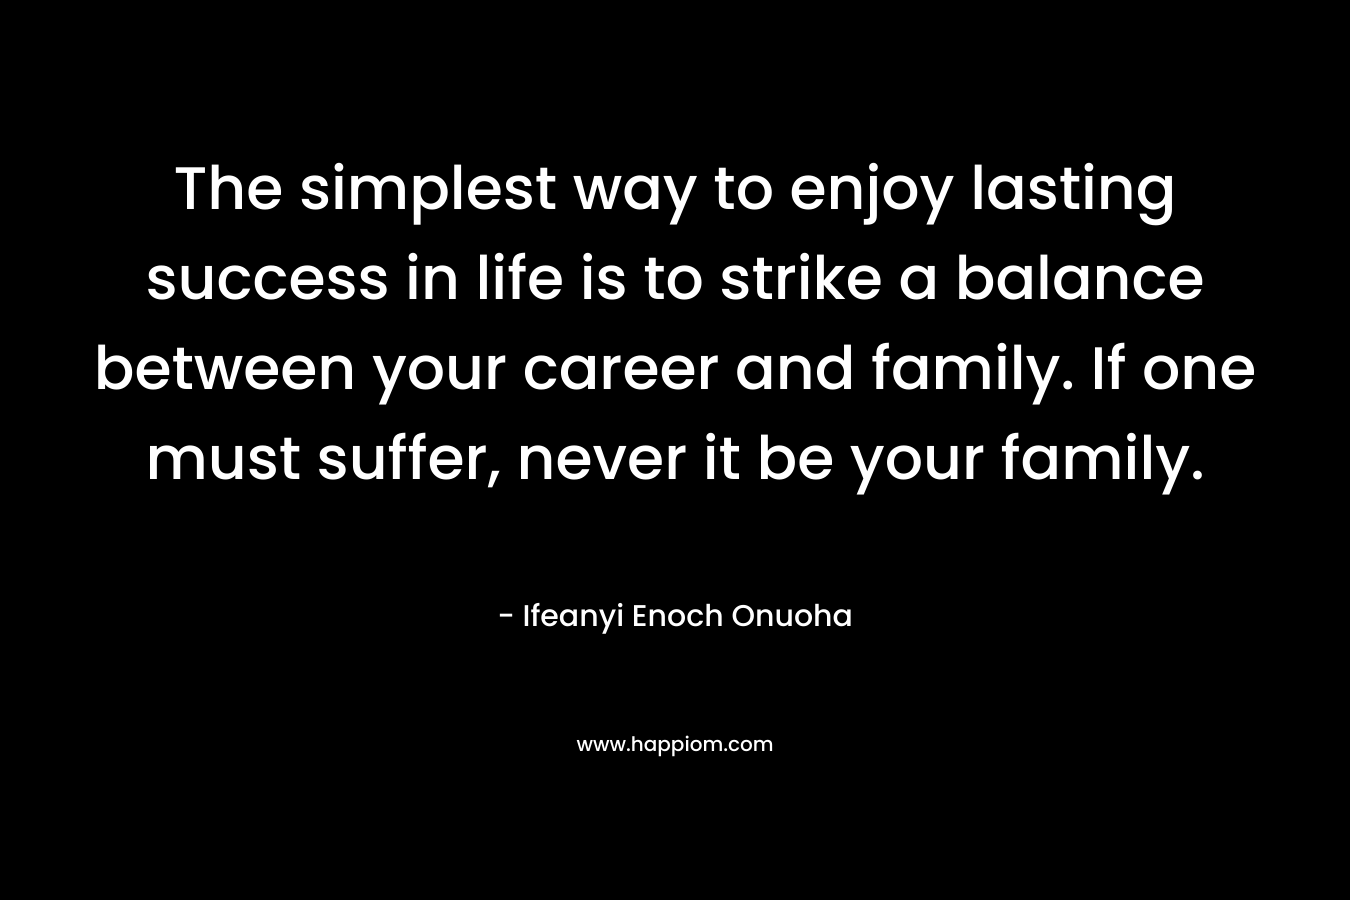 The simplest way to enjoy lasting success in life is to strike a balance between your career and family. If one must suffer, never it be your family.